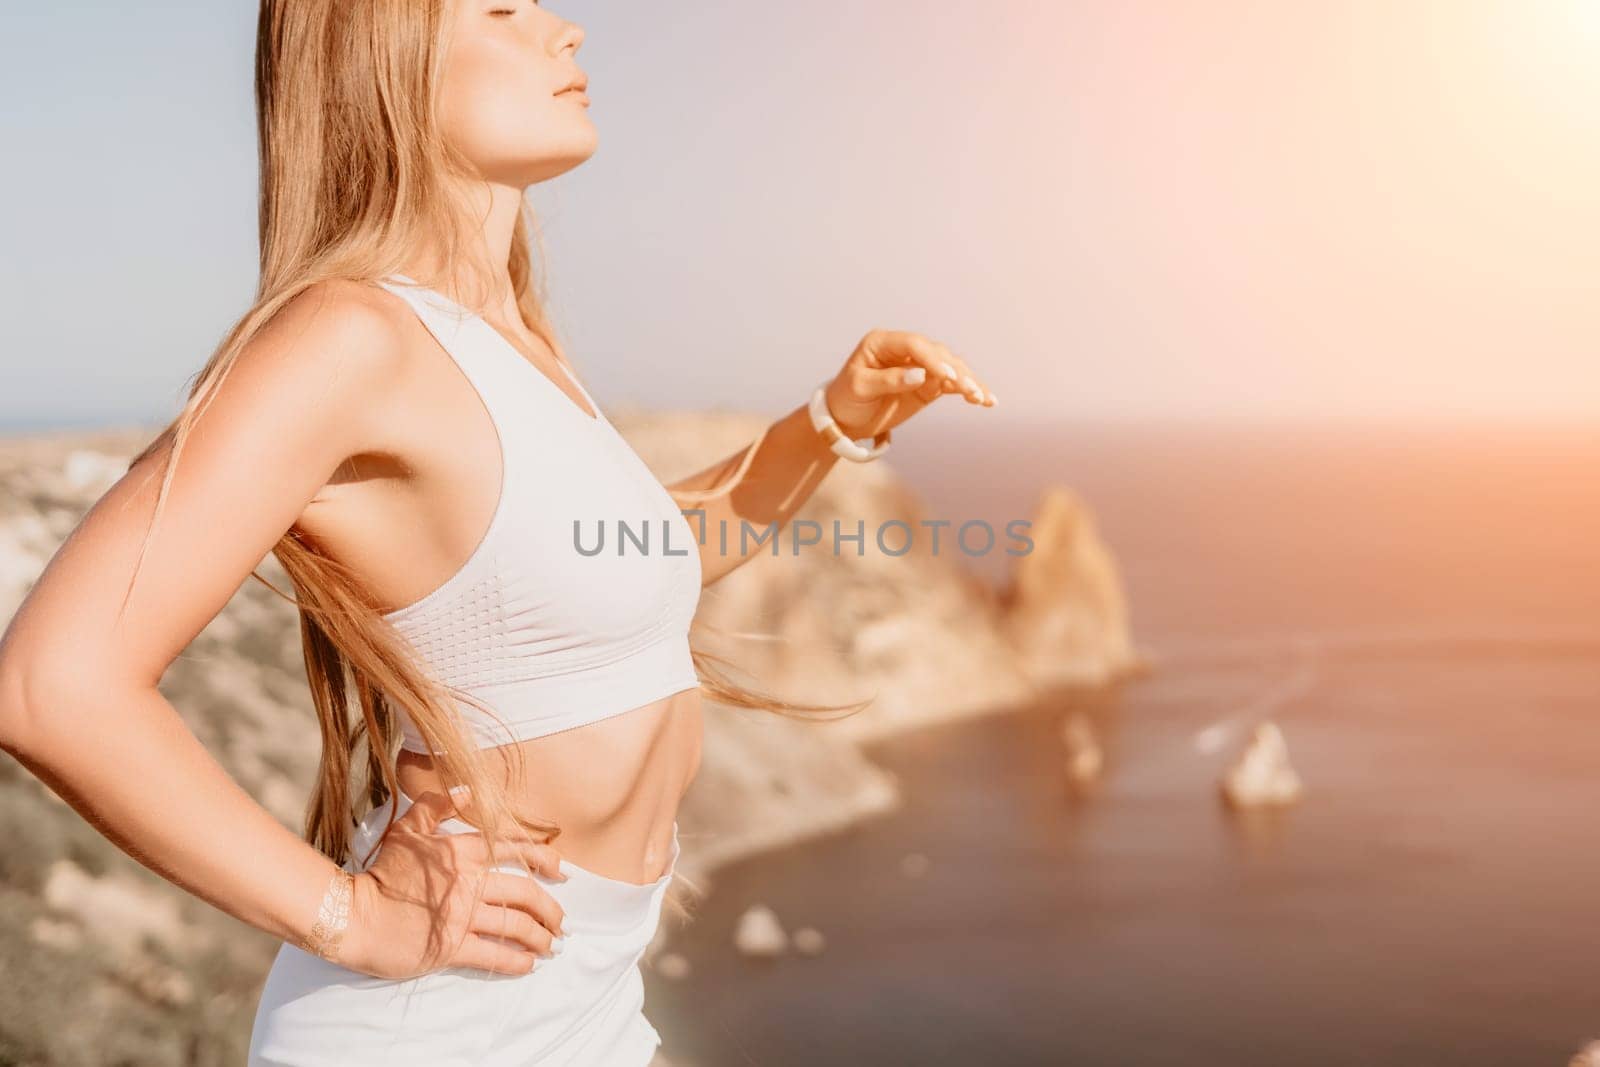 Woman summer travel sea. Happy tourist in hat enjoy taking picture outdoors for memories. Woman traveler posing on the beach at sea surrounded by volcanic mountains, sharing travel adventure journey by panophotograph